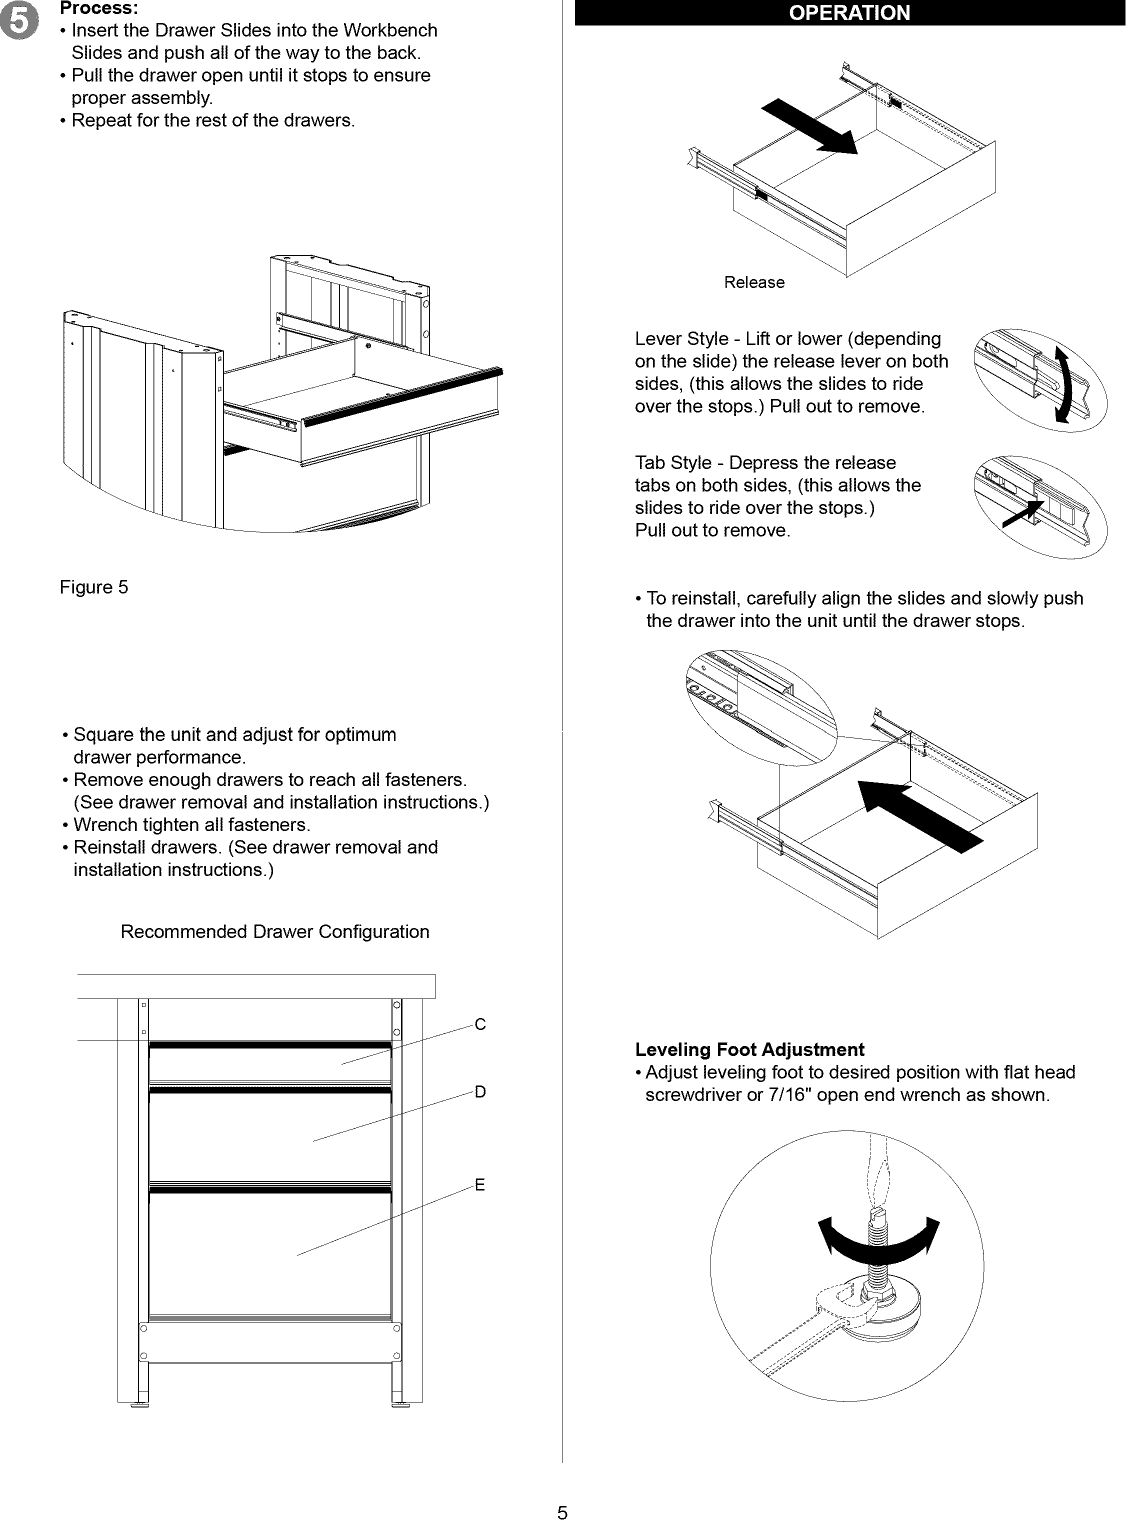 Page 5 of 10 - Craftsman 706149260 1108813L User Manual  3 DRAWER ACCESSORY - Manuals And Guides